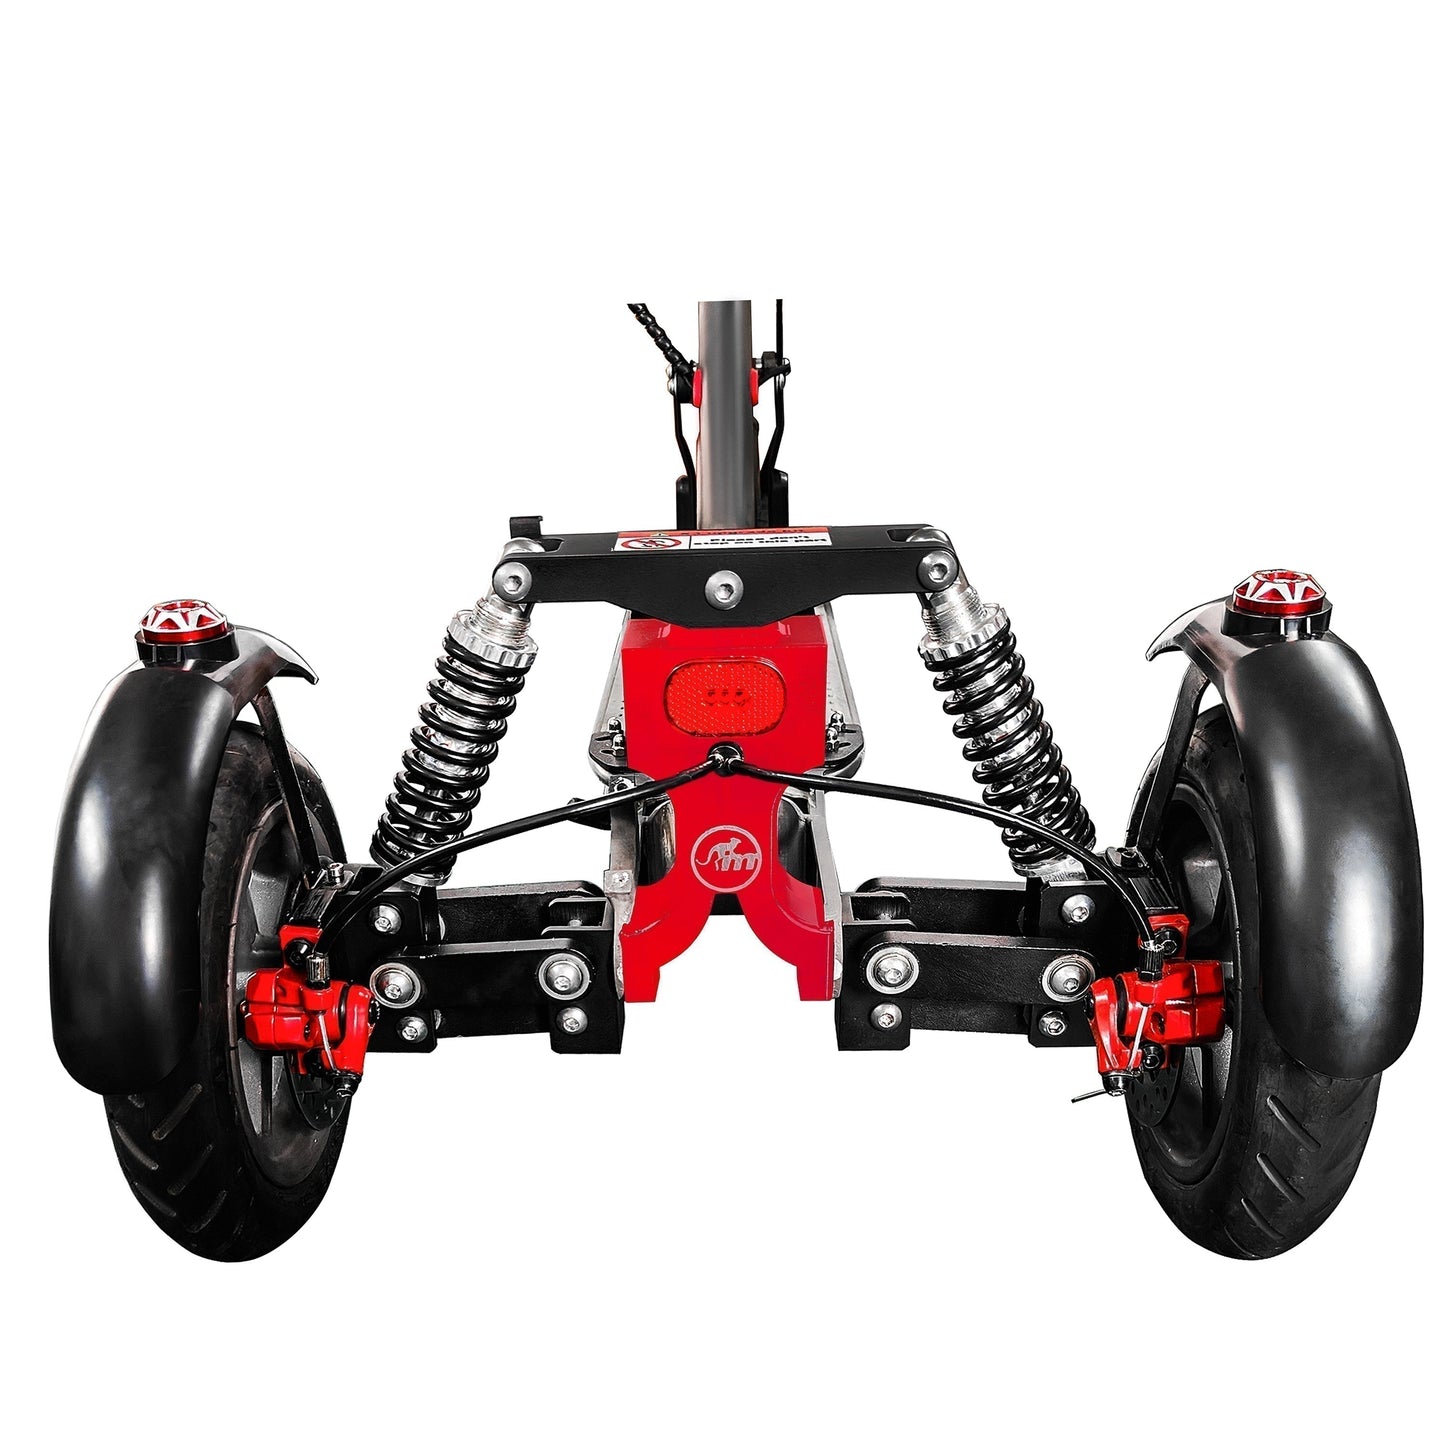 Monorim X3 upgrade kit to be Three wheels special for s9pro Scooter